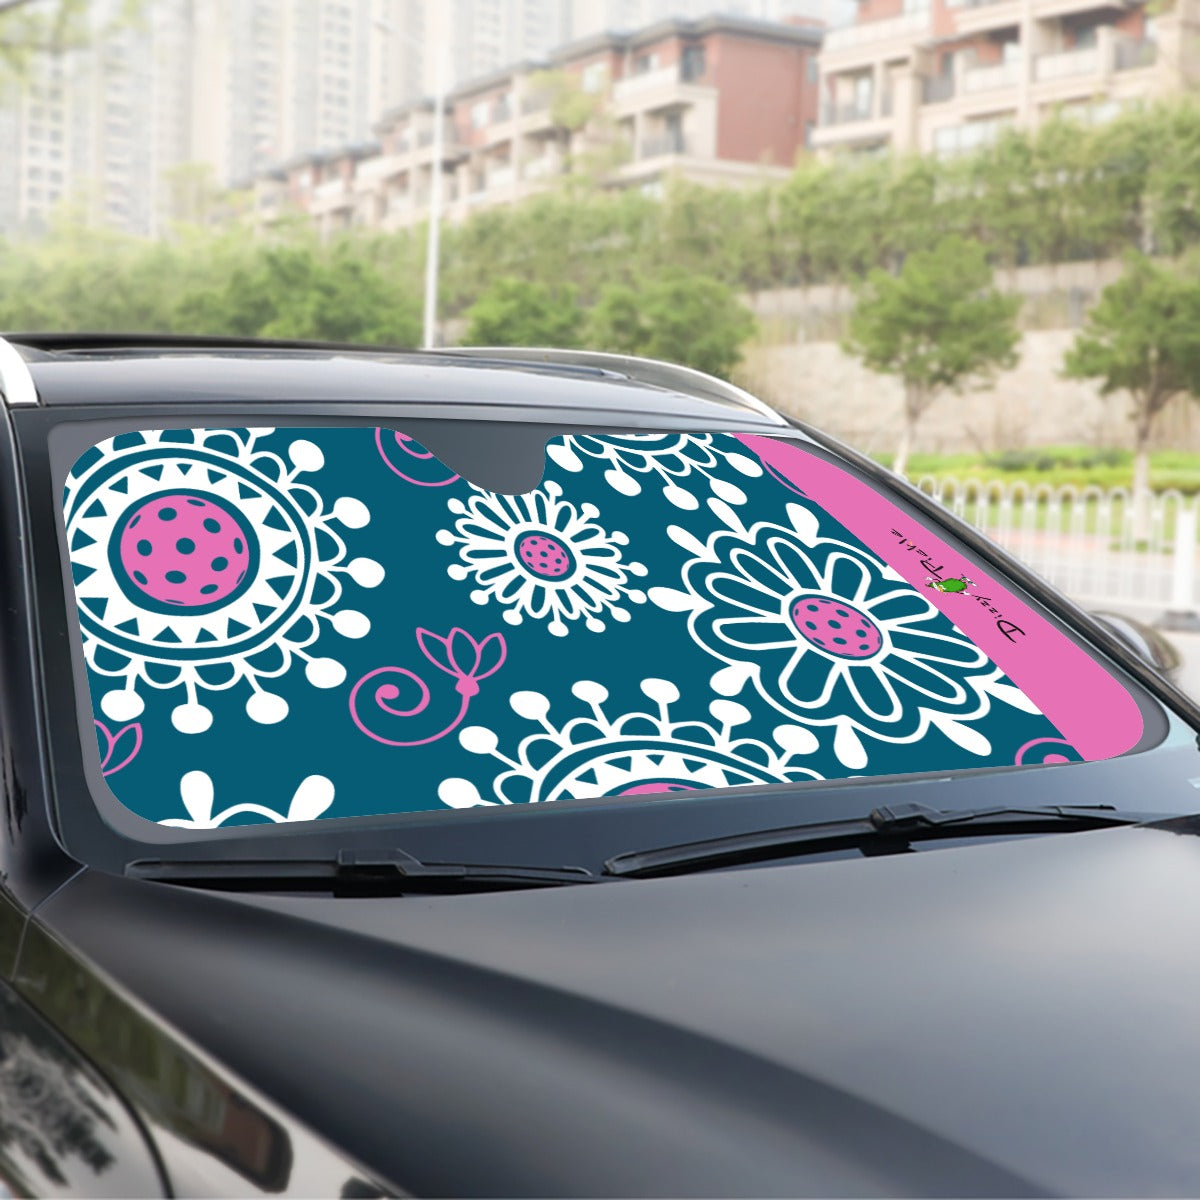 Coming Up Daisies - Peacock/Pink - Pickleball Windshield Sunshade by Dizzy Pickle